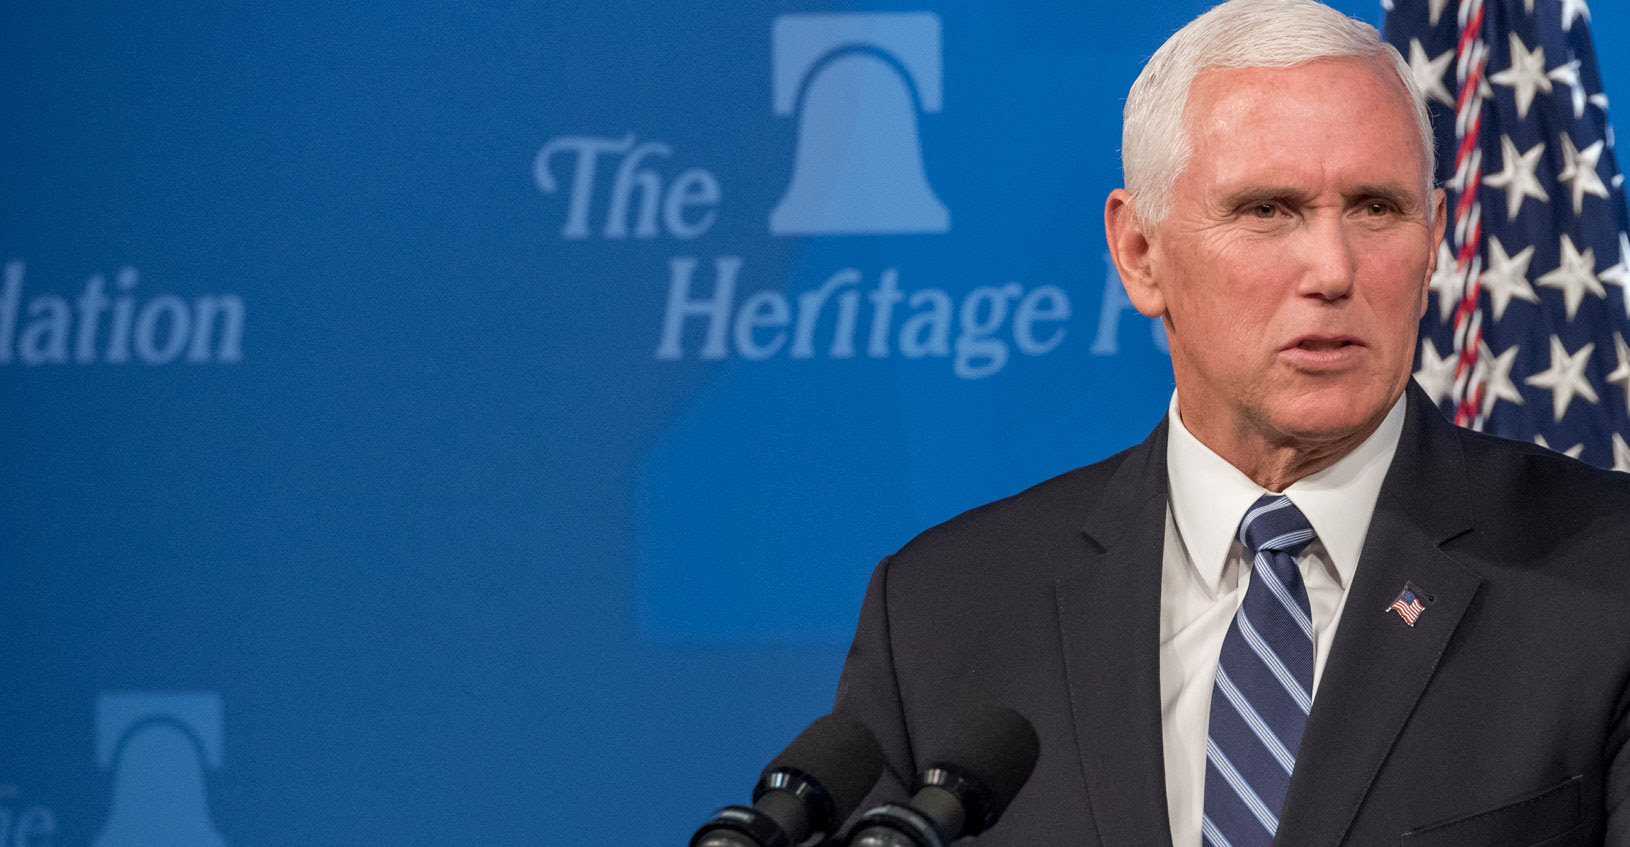 Pence to Join Heritage Foundation, Write Column for Daily Signal